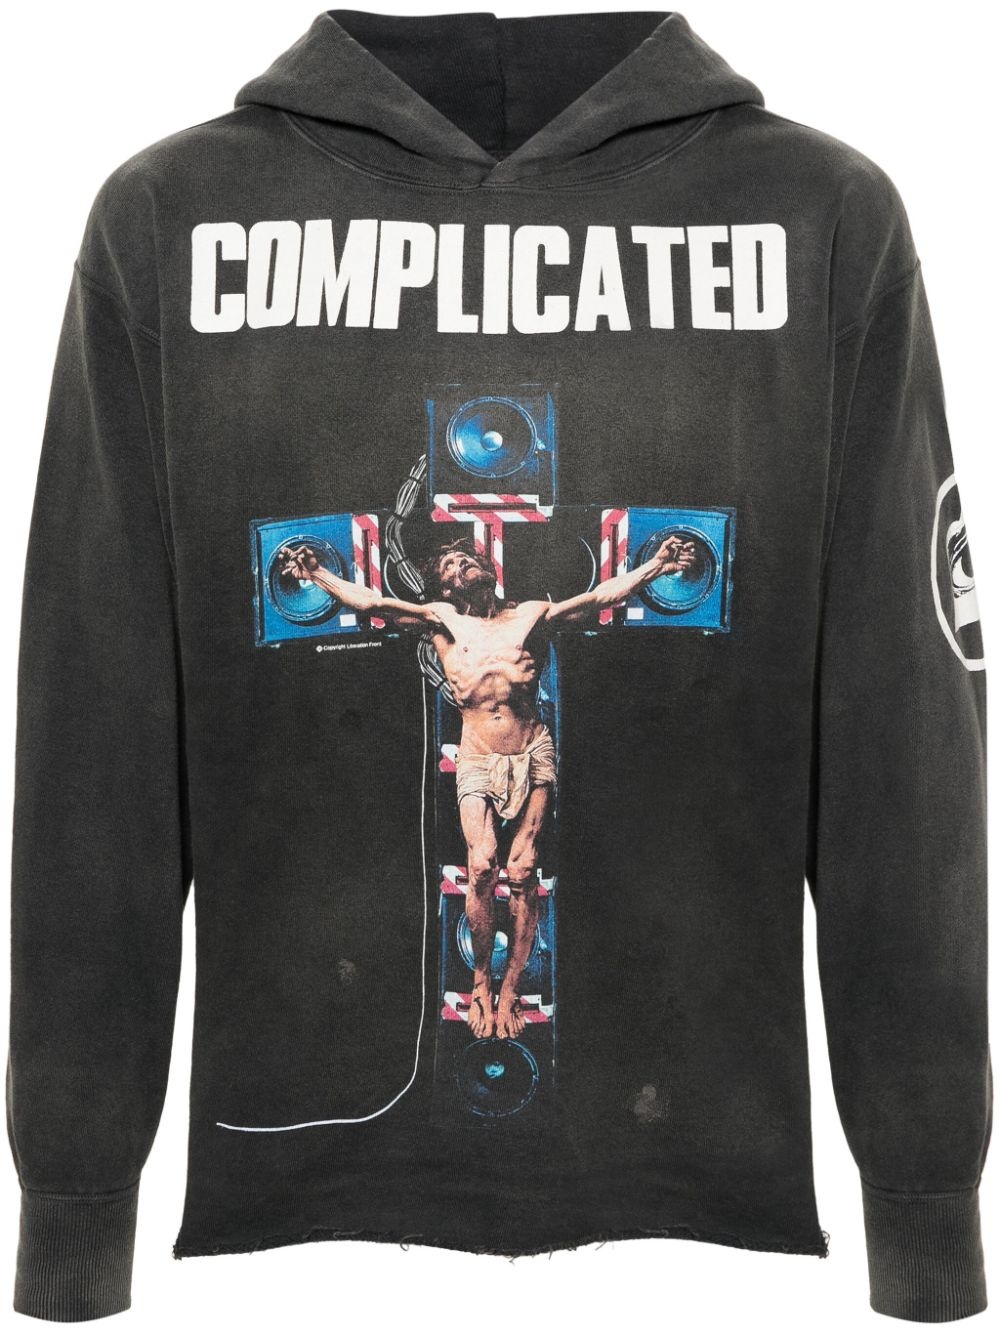 Complicated cotton hoodie - 1